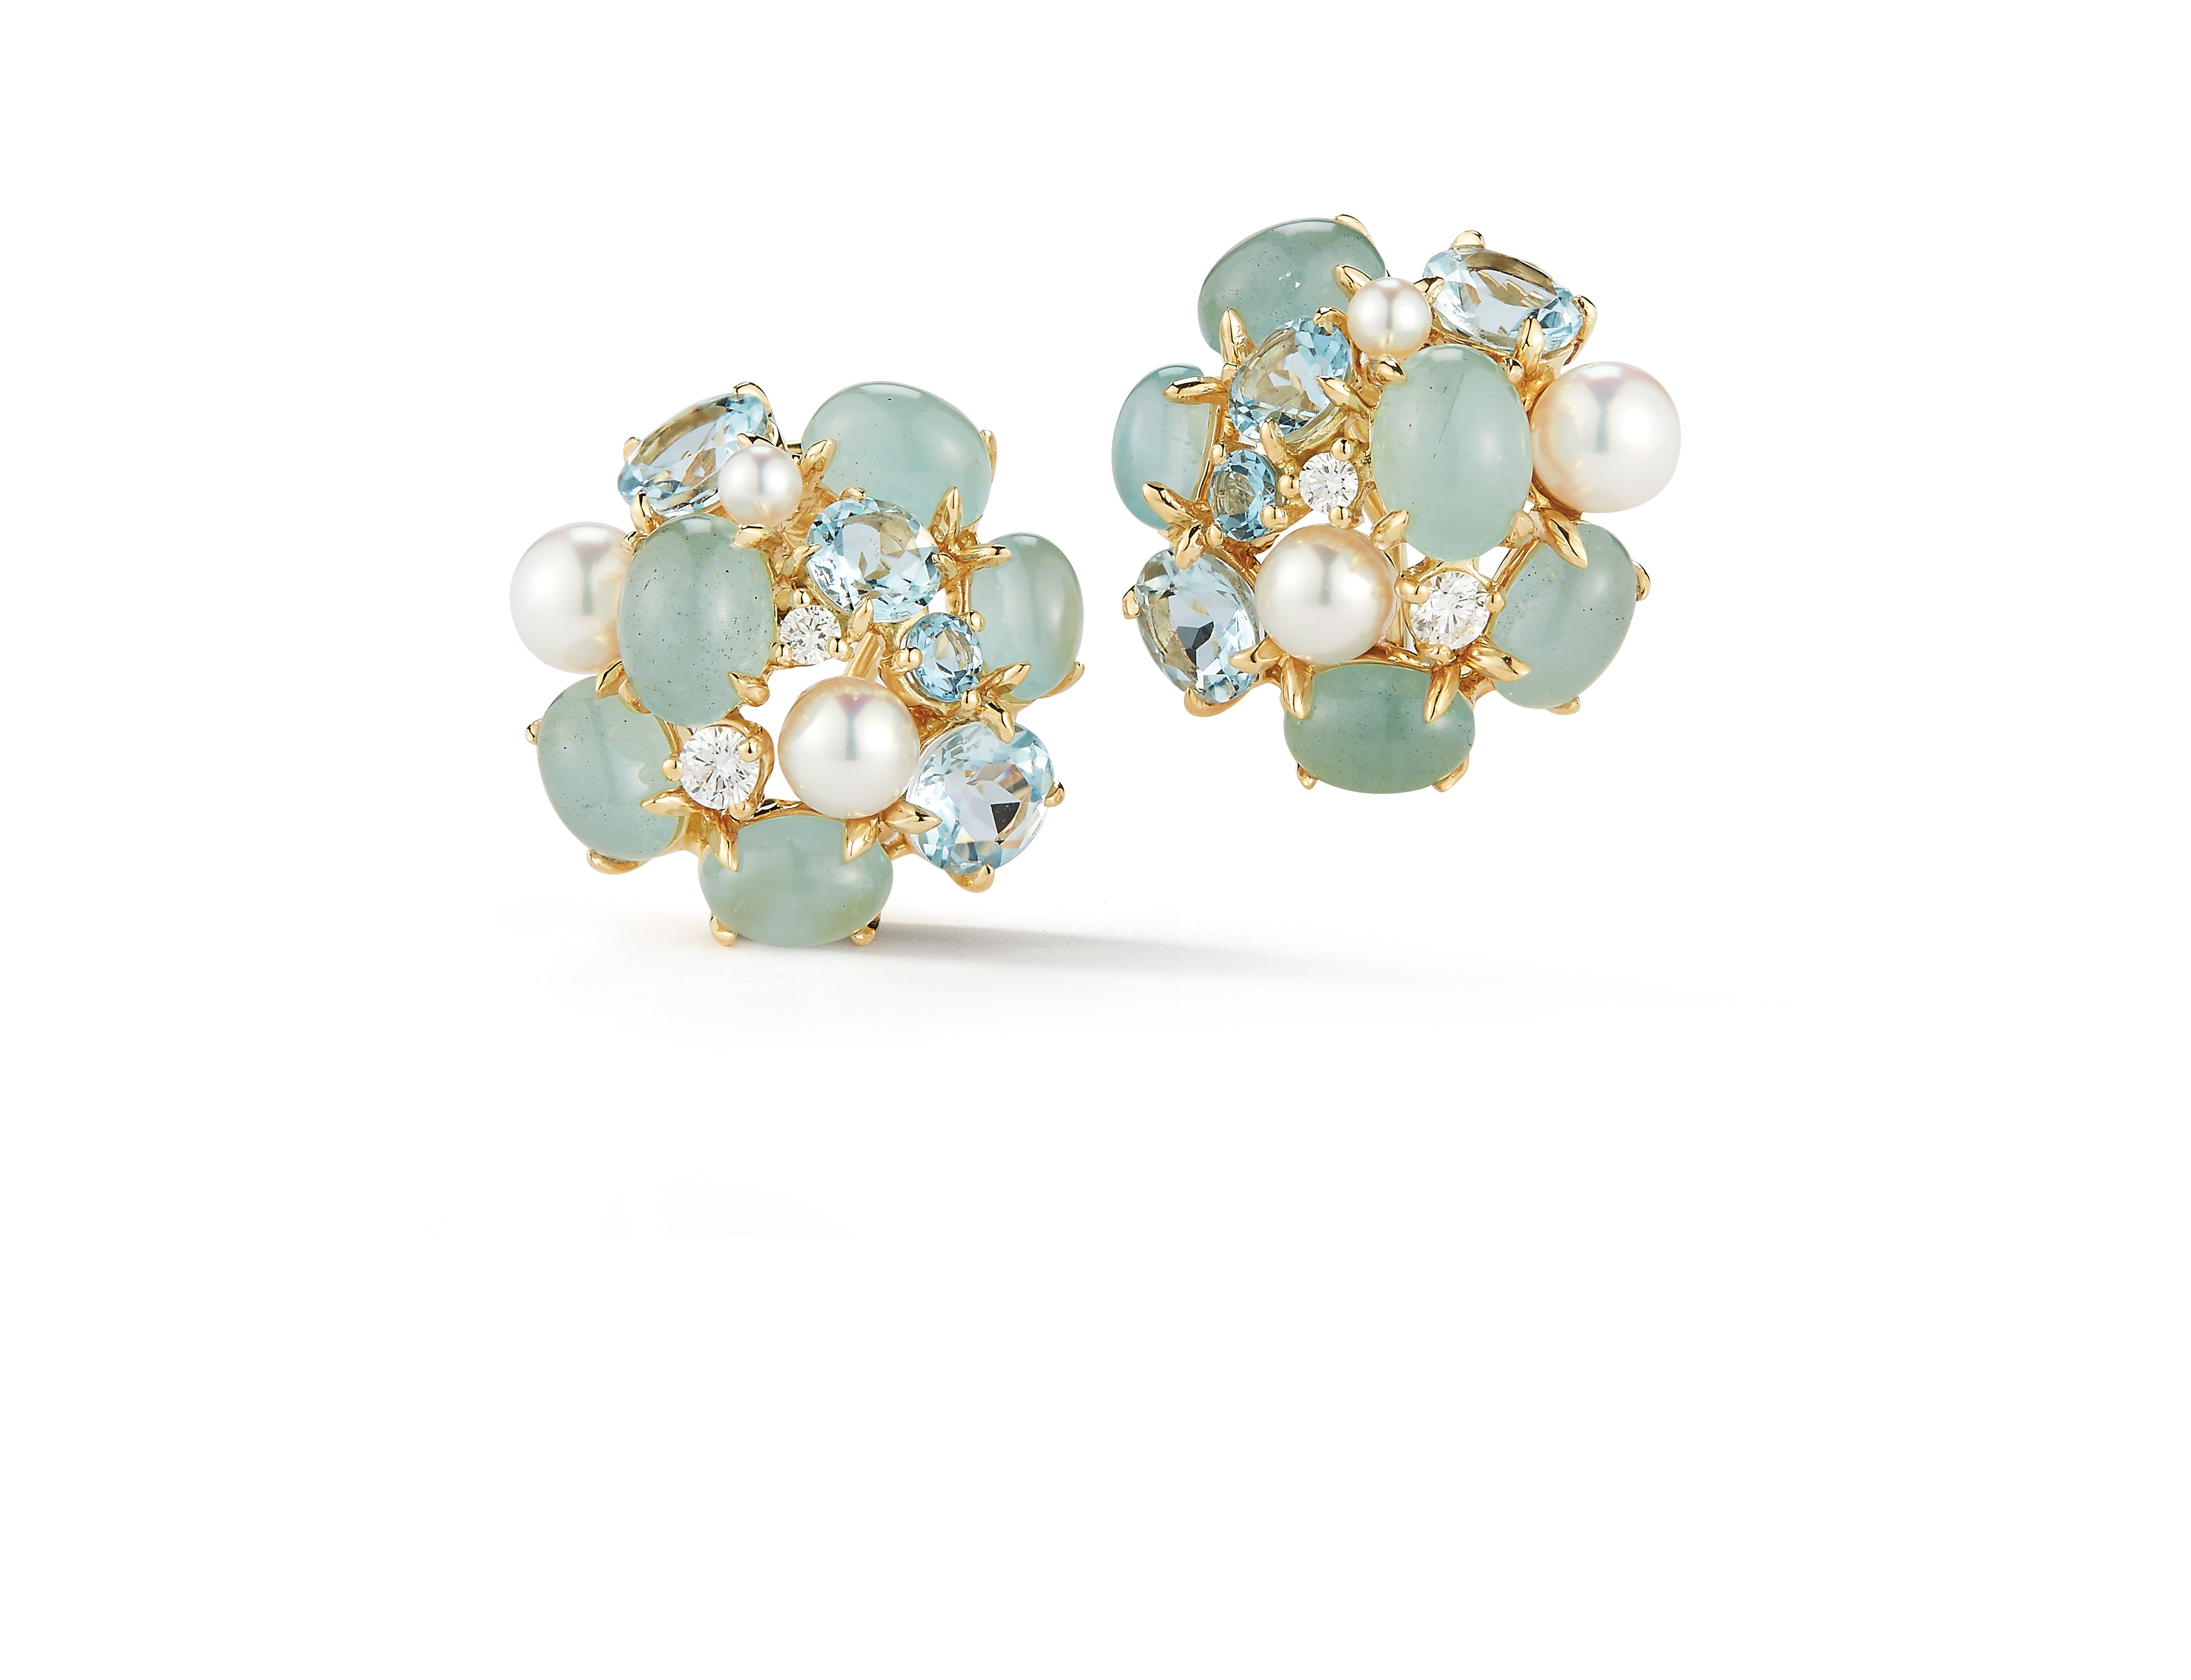 A pair of Bubble Earrings with Aquamarine, Pearl, and Diamond set in 18K Yellow Gold. Signed Seaman Schepps.